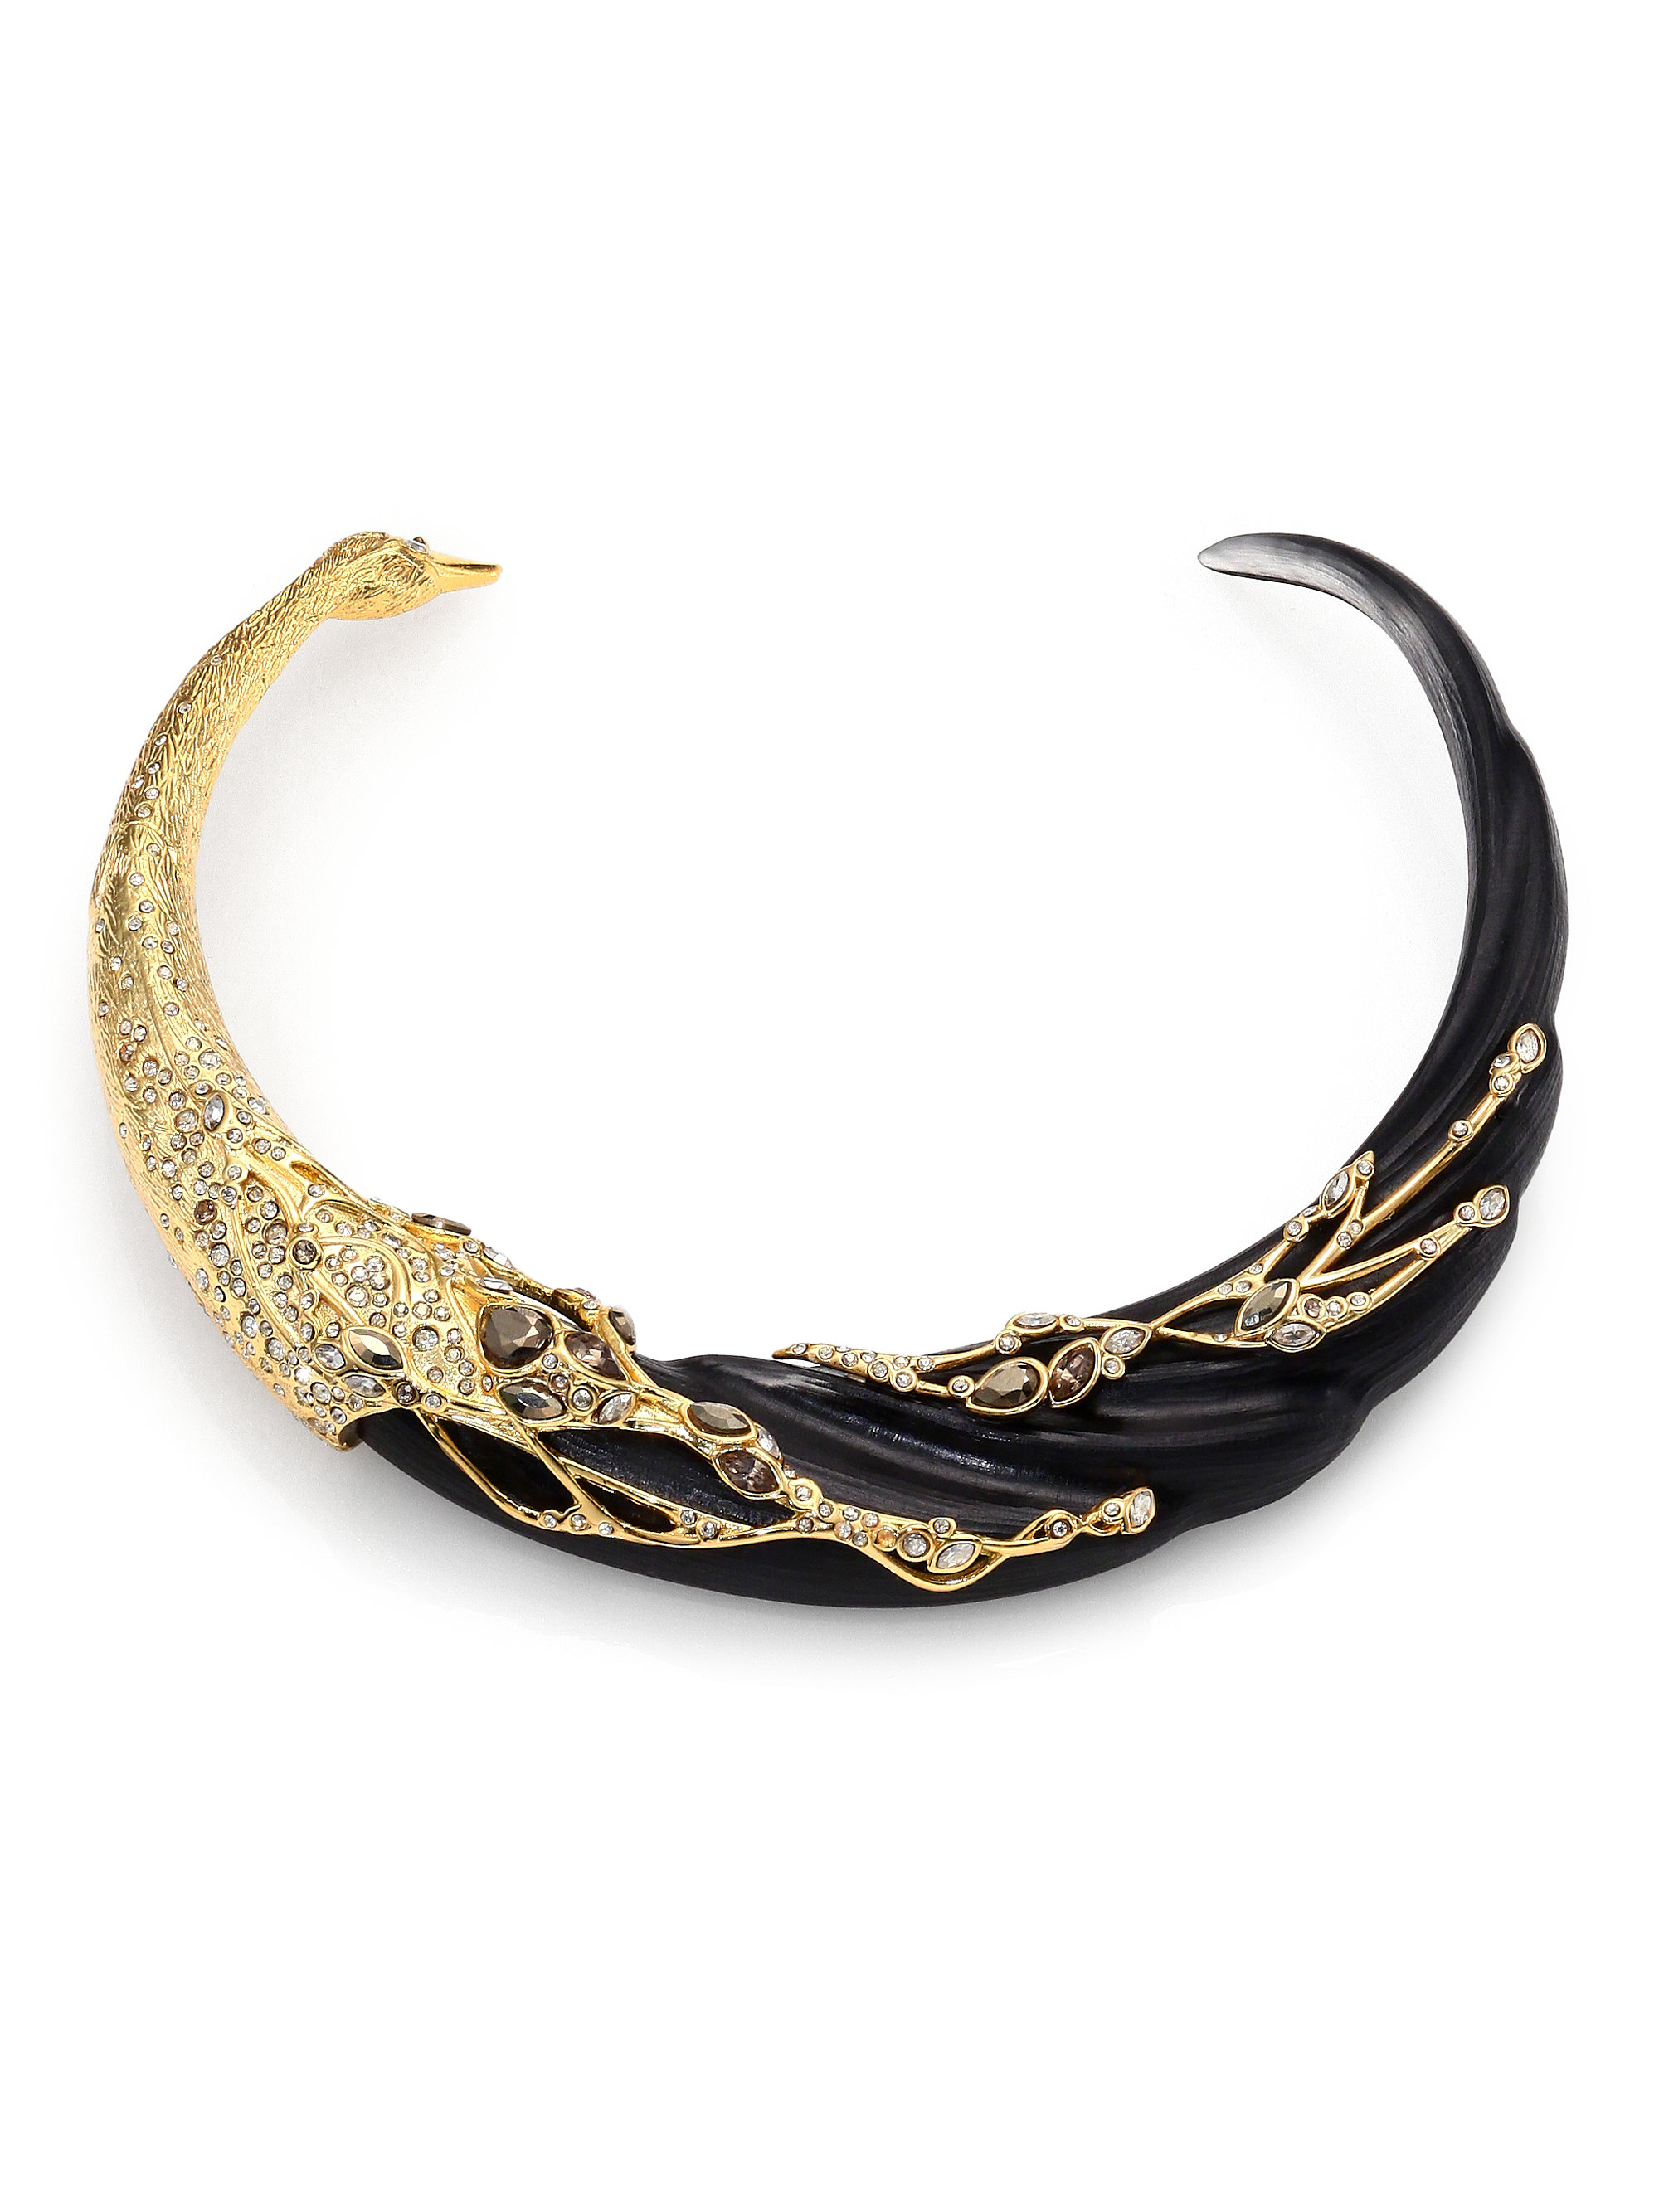 Alexis Bittar Imperial Lucite & Crystal Swan Collar Necklace/Black in ...